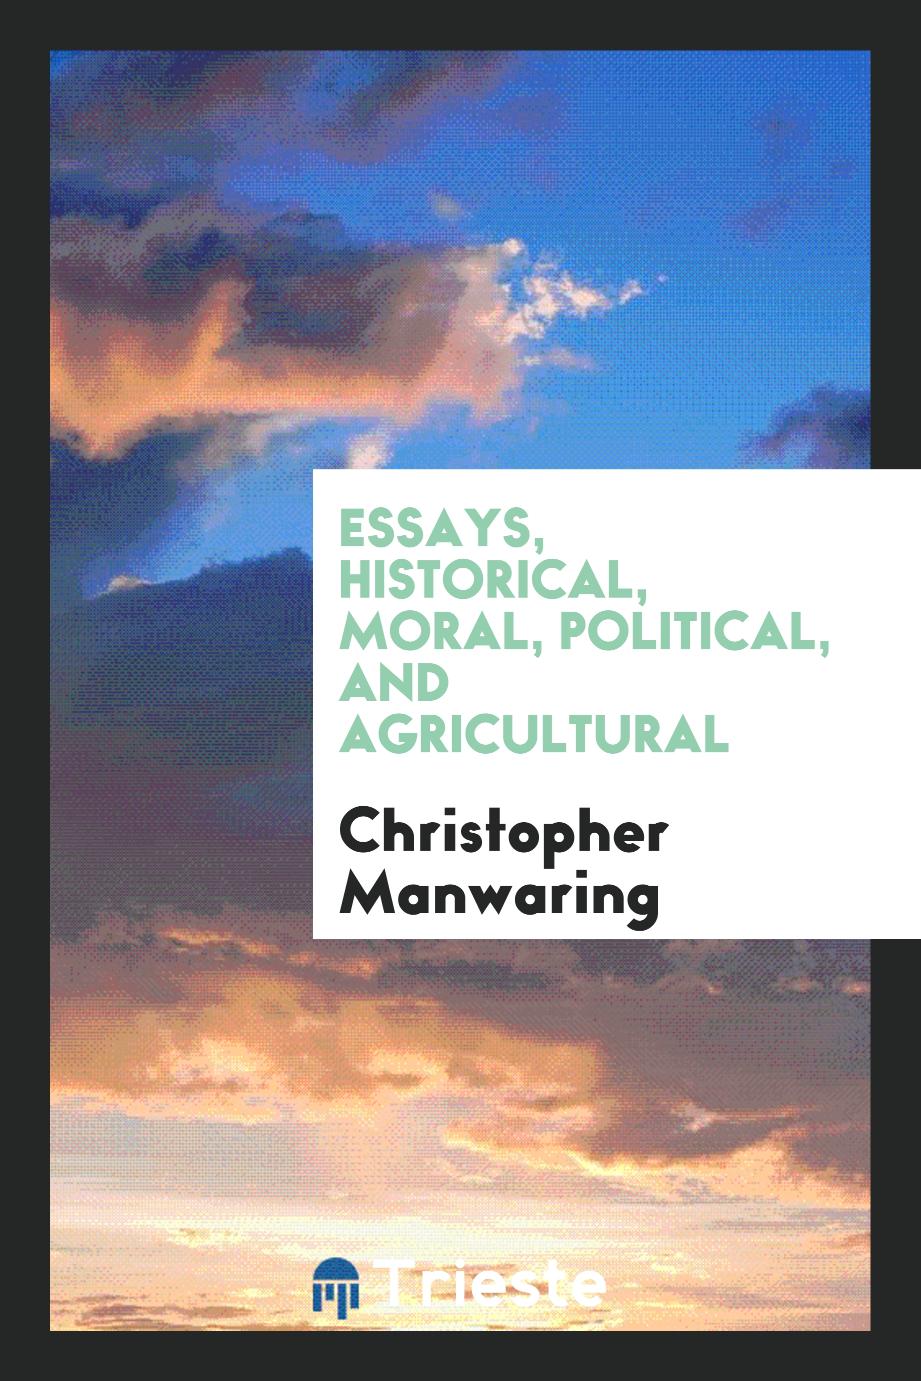 Essays, historical, moral, political, and agricultural